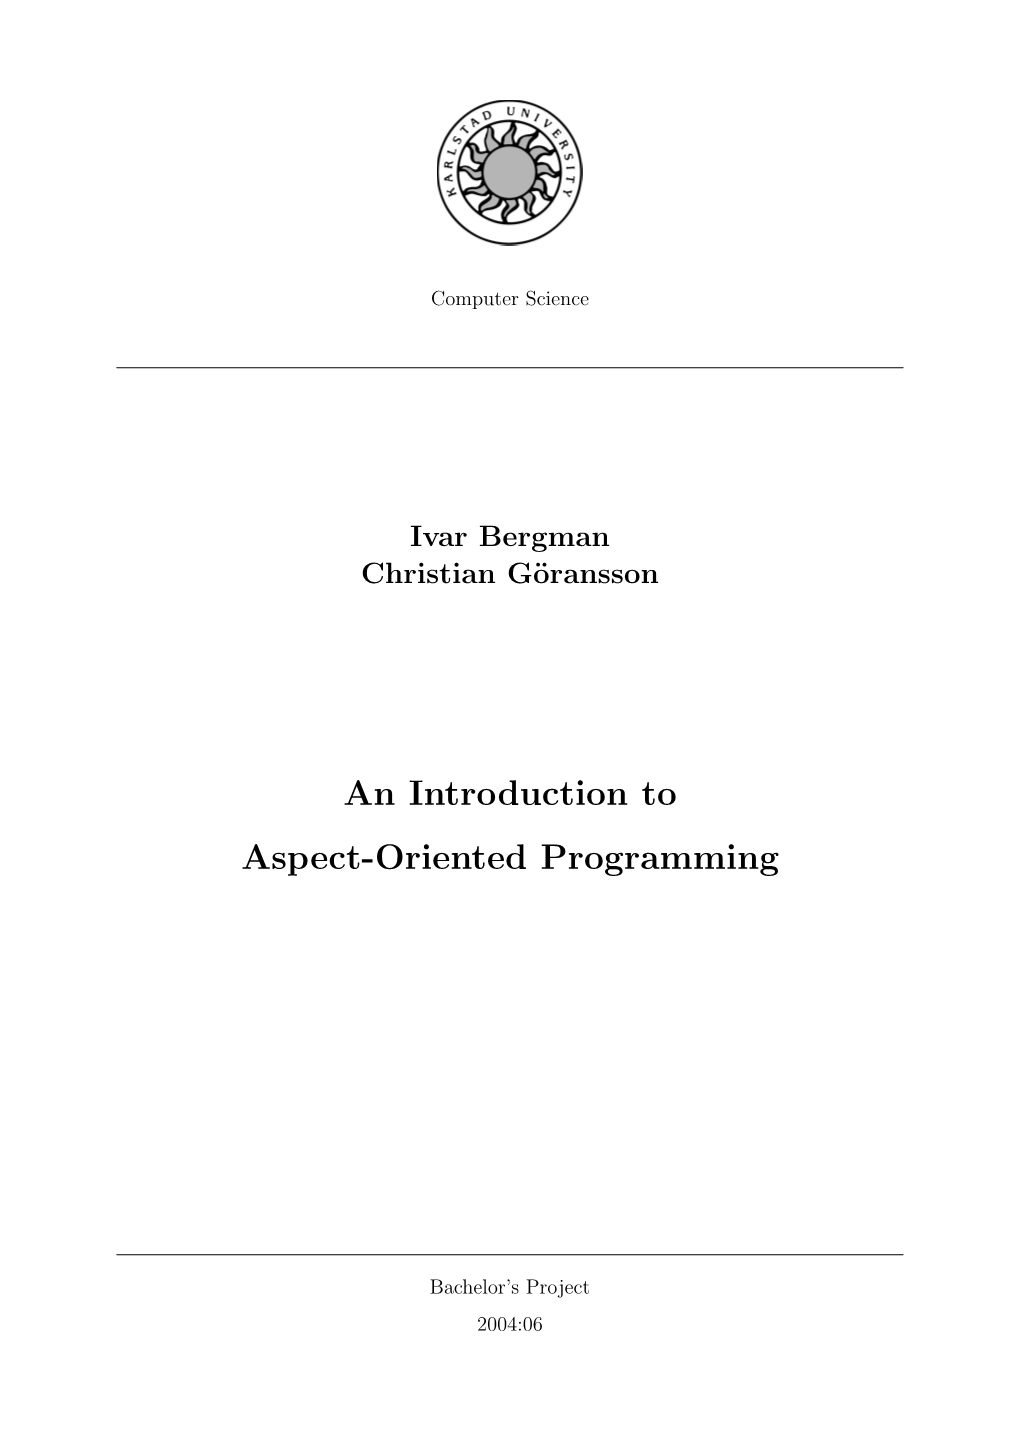 An Introduction to Aspect-Oriented Programming